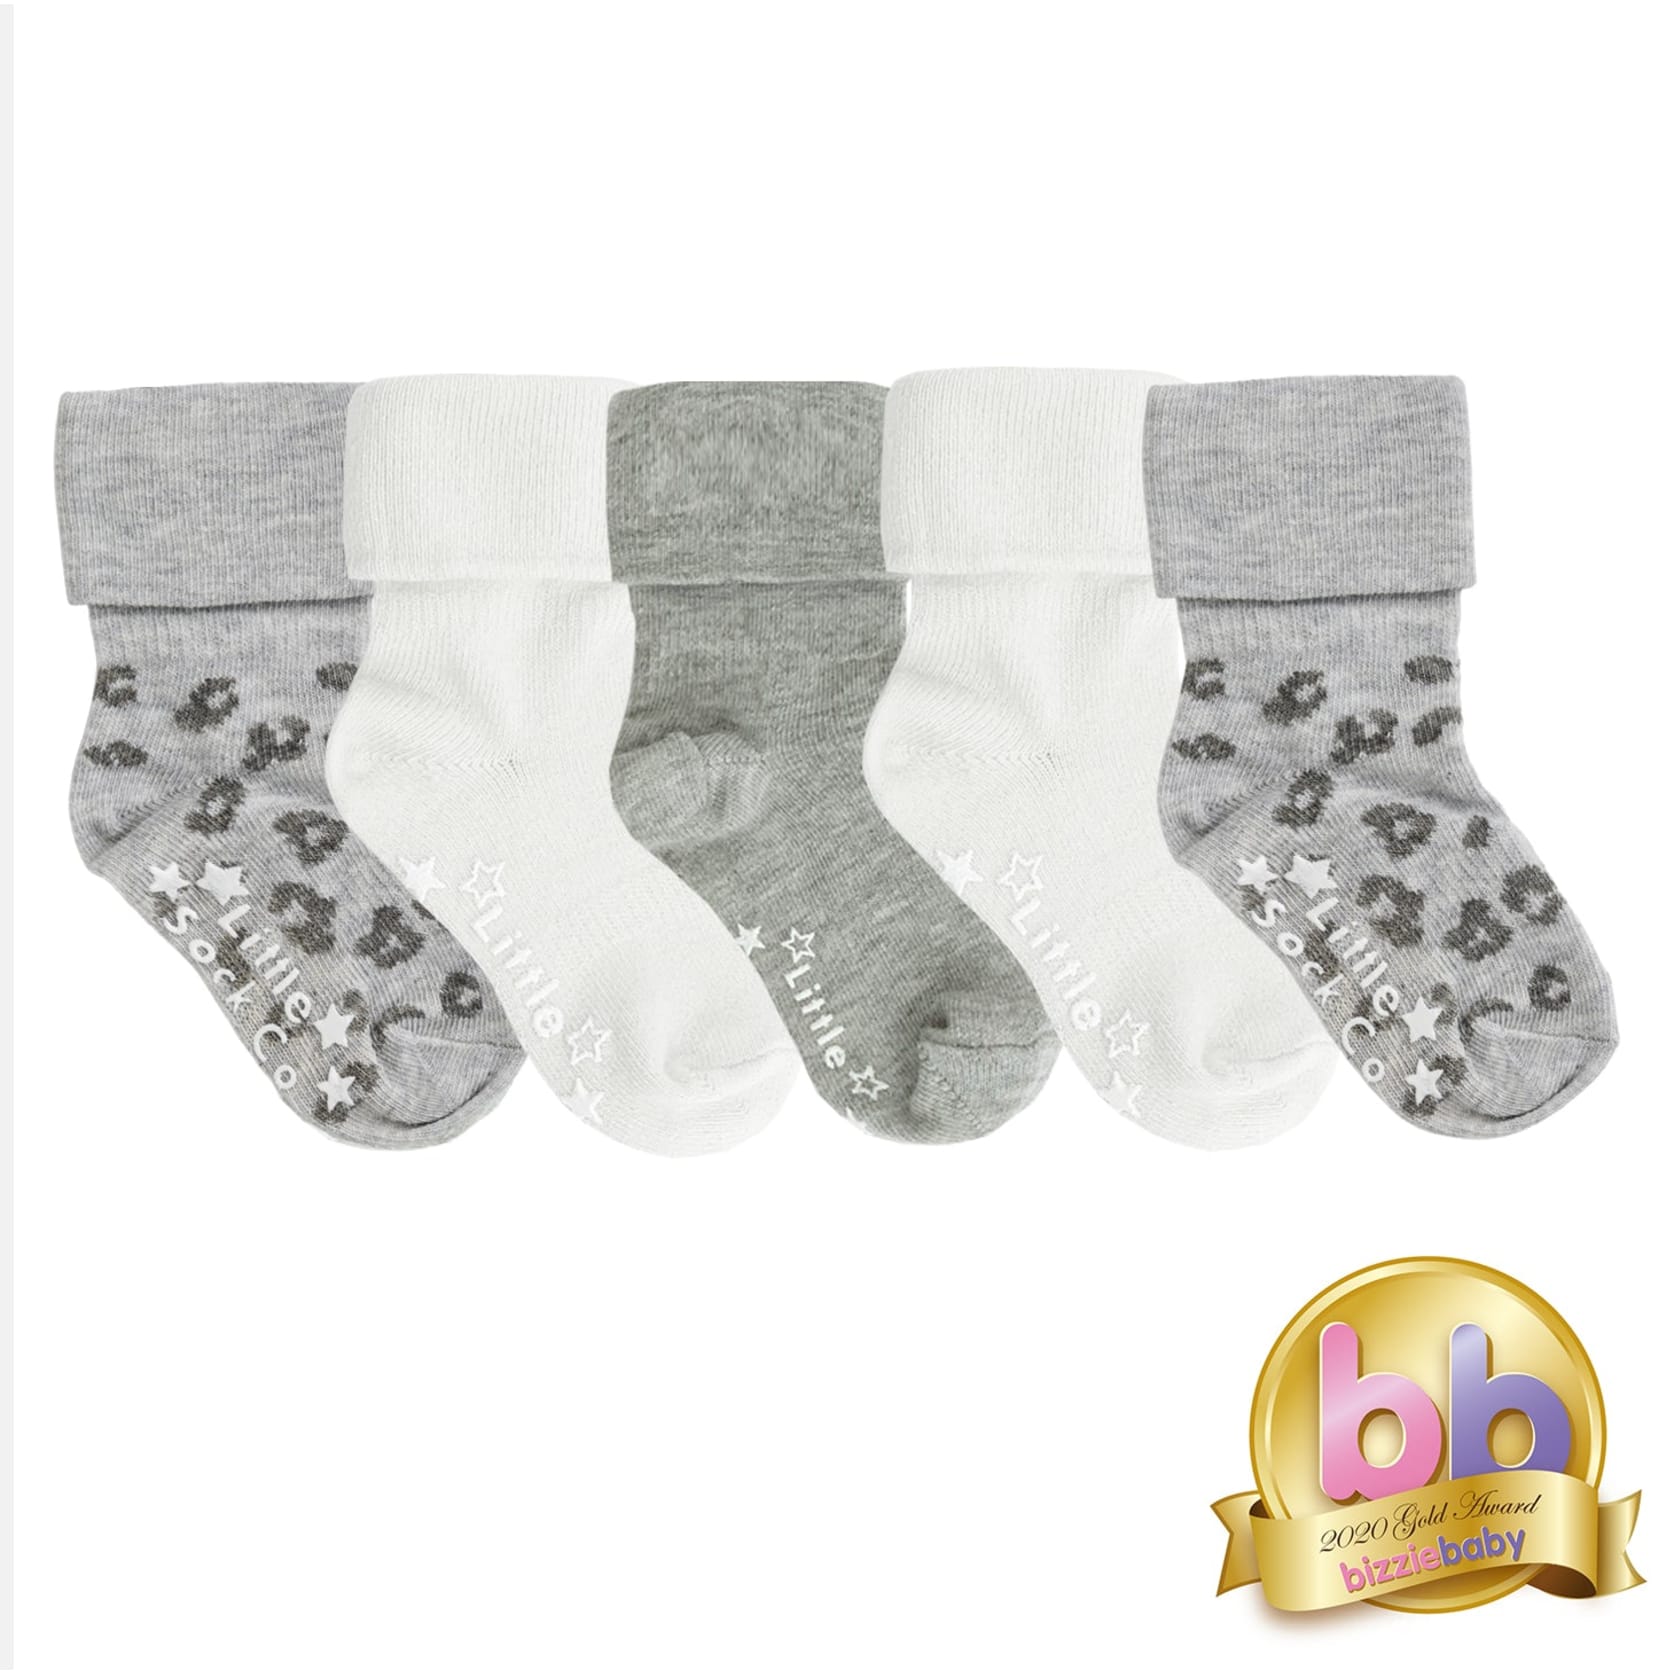 Non-Slip Stay on Baby and Toddler Socks - 5 Pack in Animal, Grey and White